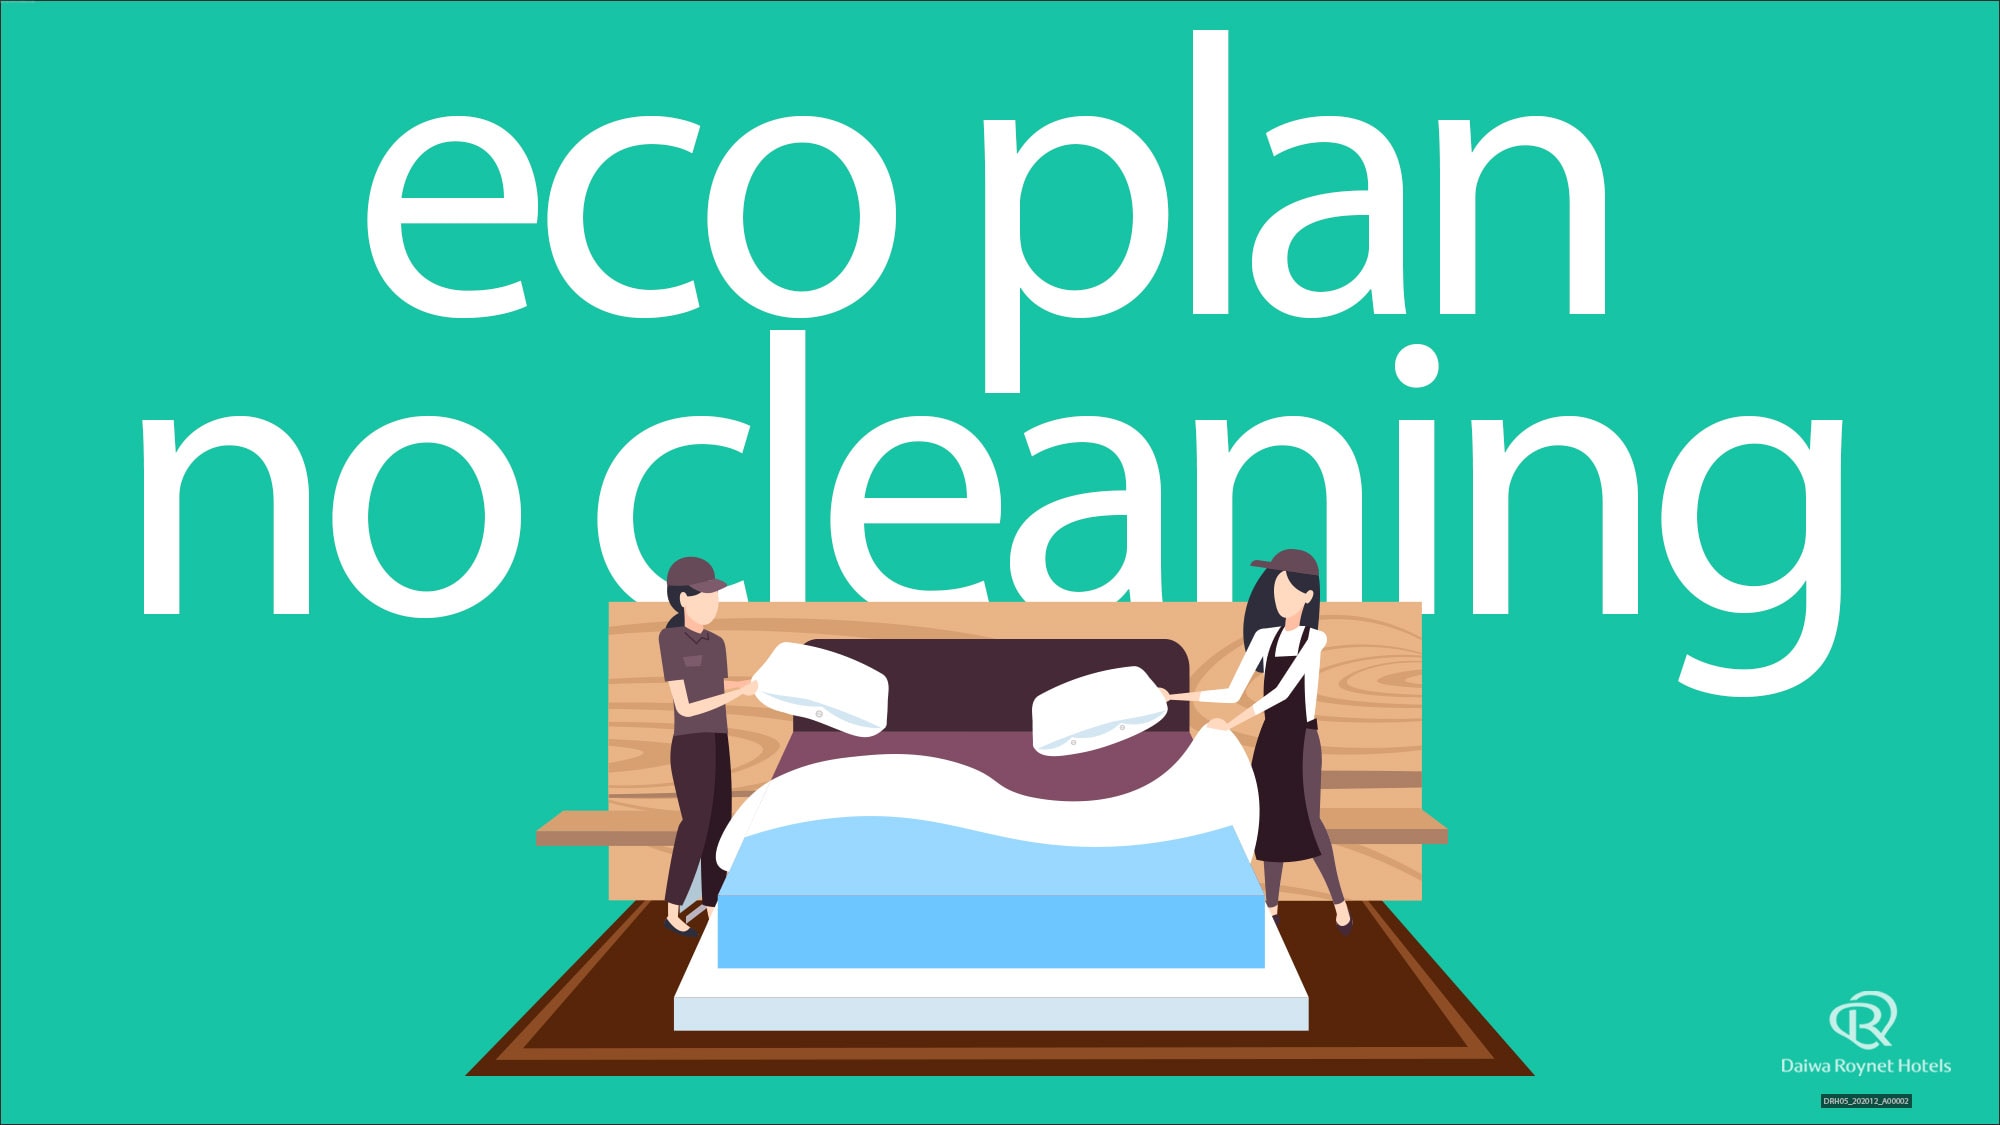 If you do not need cleaning, please make a reservation with the eco plan.